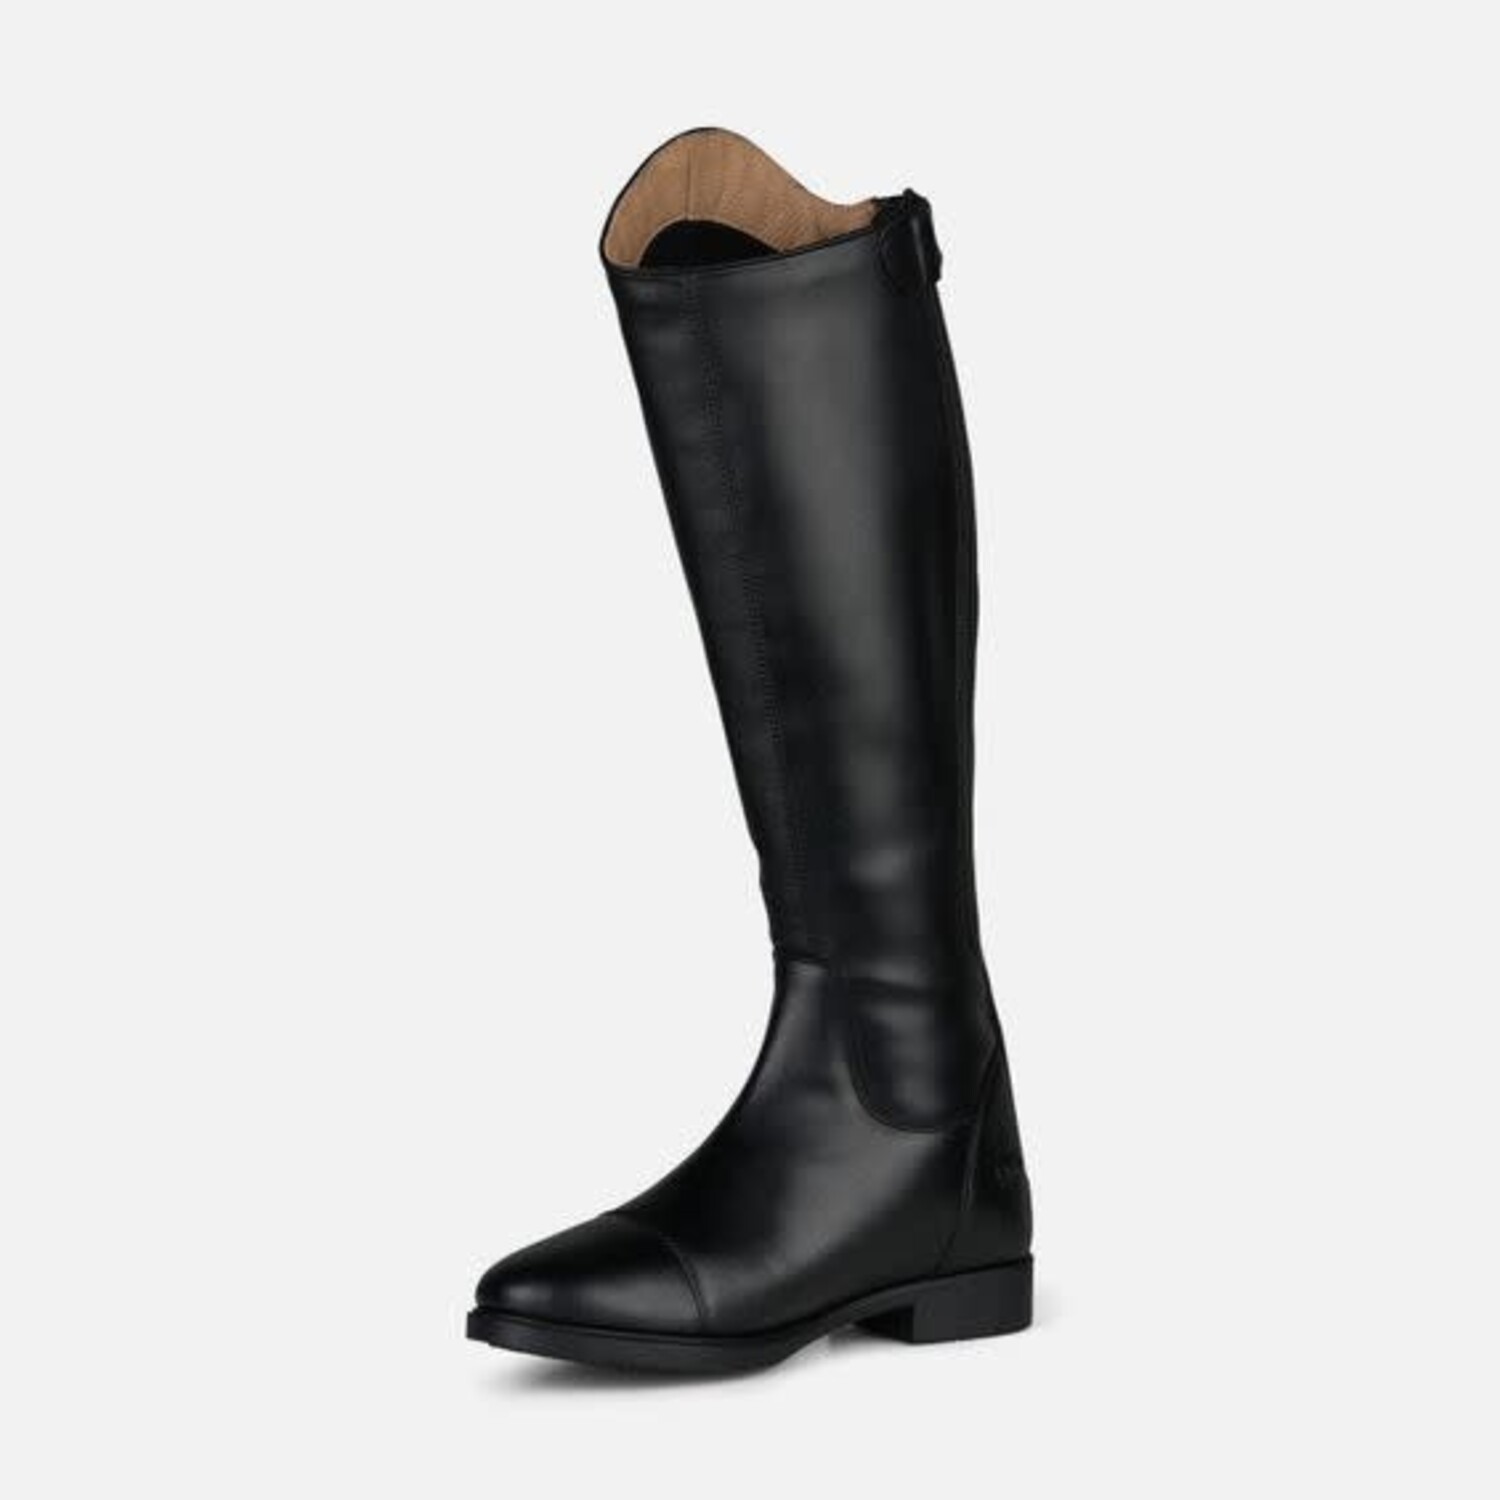 WOMEN'S ROVER DRESSAGE TALL BOOT - Equine Essentials Tack & Laundry Services